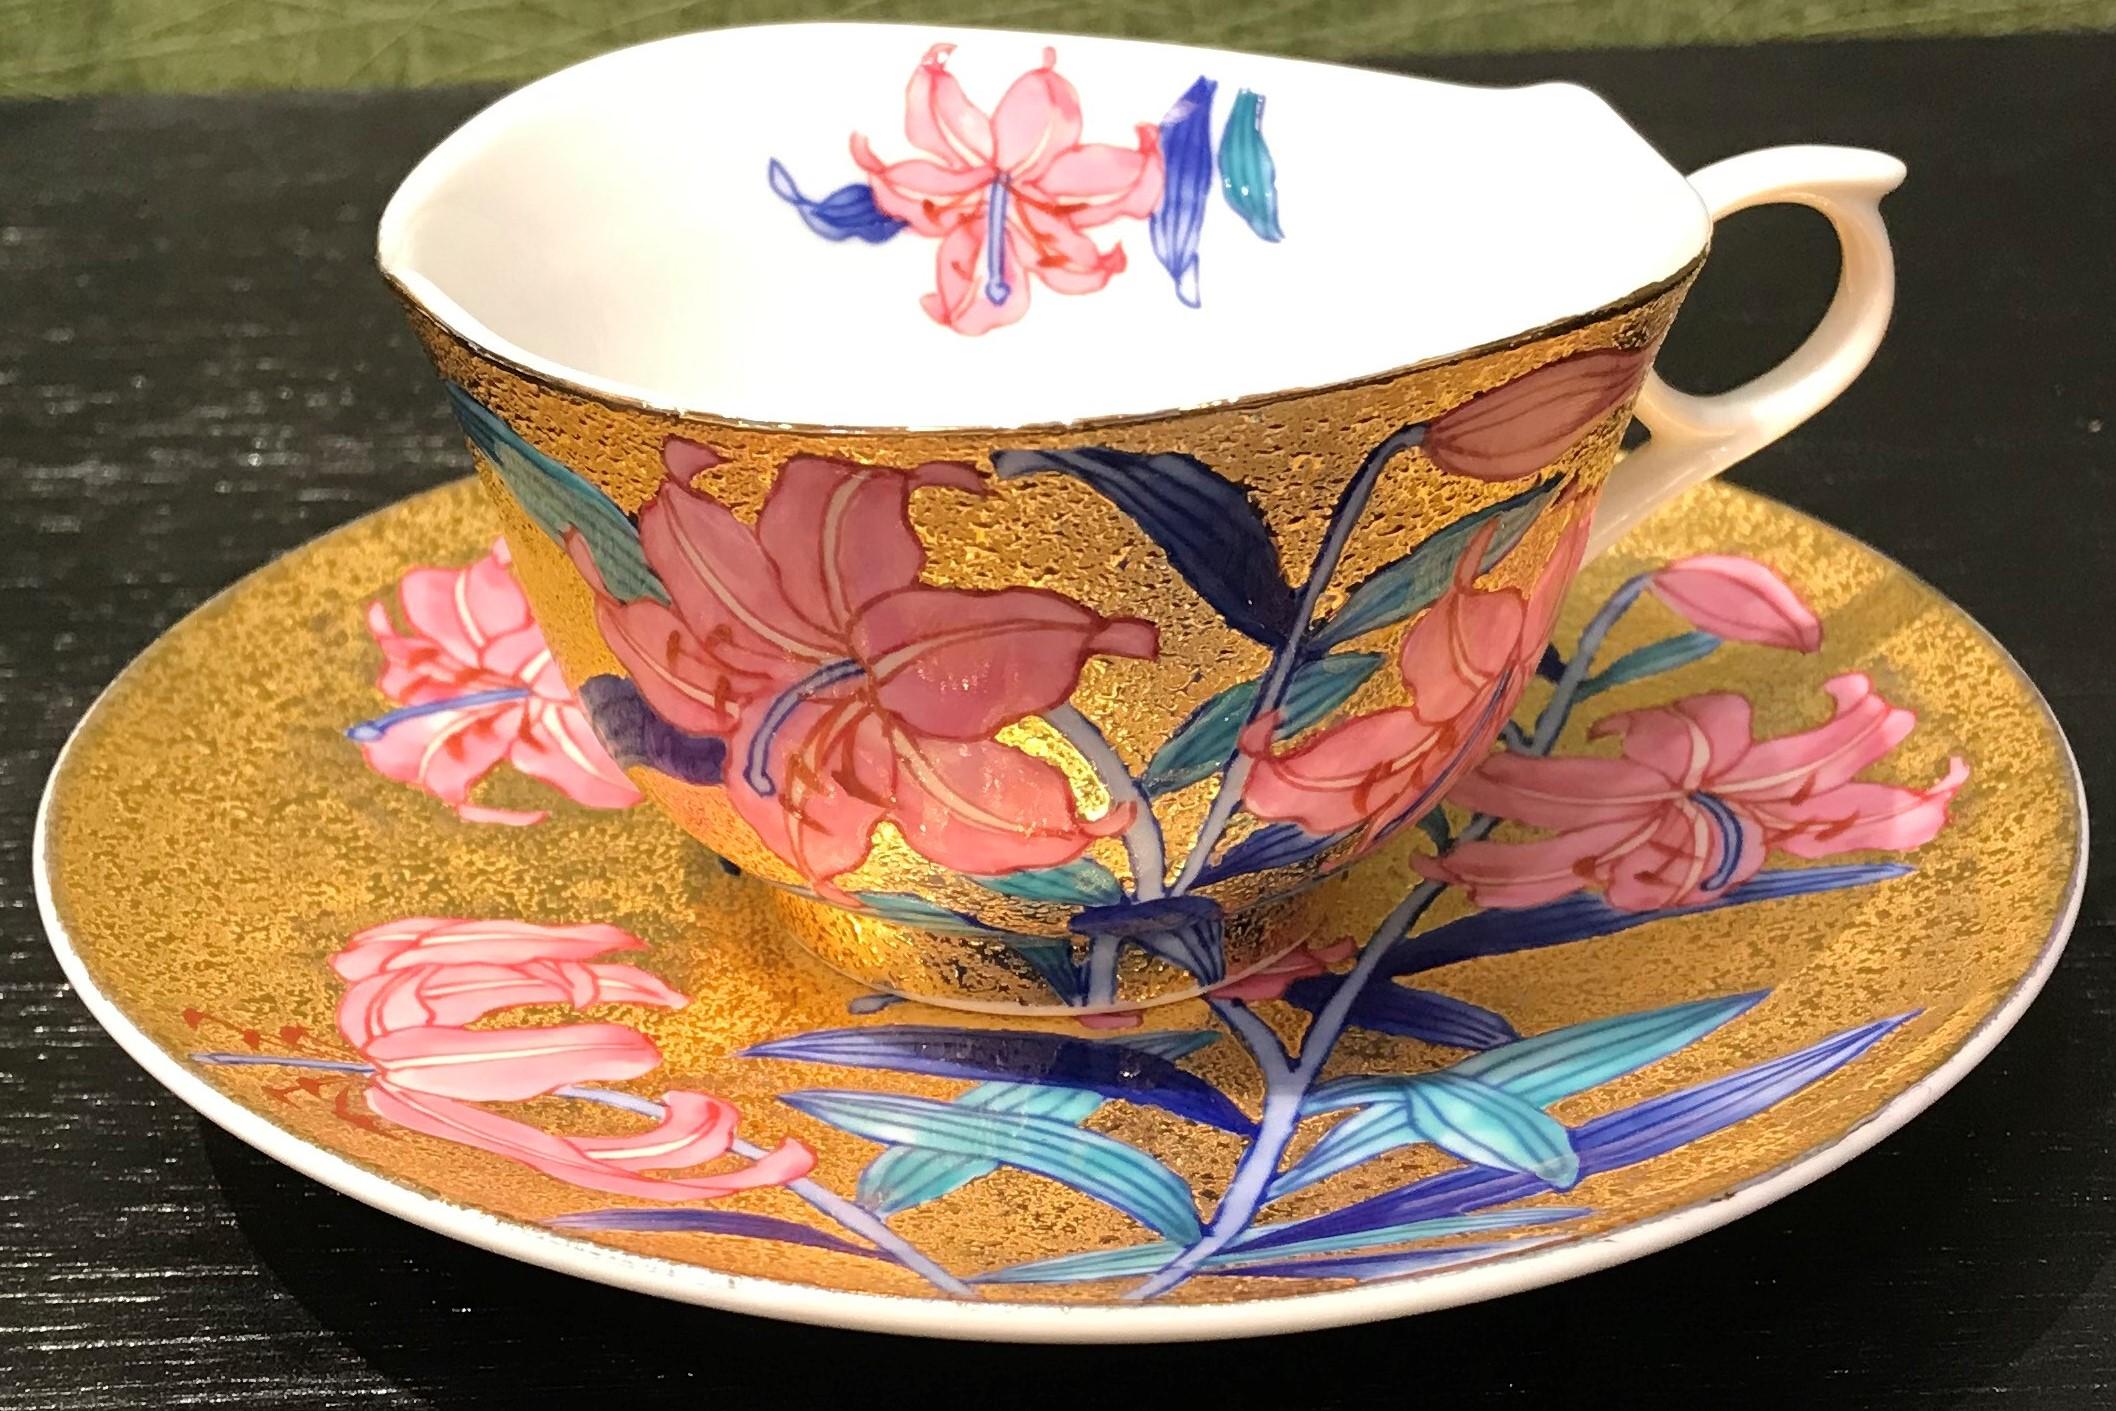 Stunning contemporary gilded porcelain cup and saucer, intricately hand painted in vivid blue, green and pink on an attractive gilded body, featuring graceful lilies in full bloom.
This cup and saucer is from a signature series by a highly respected